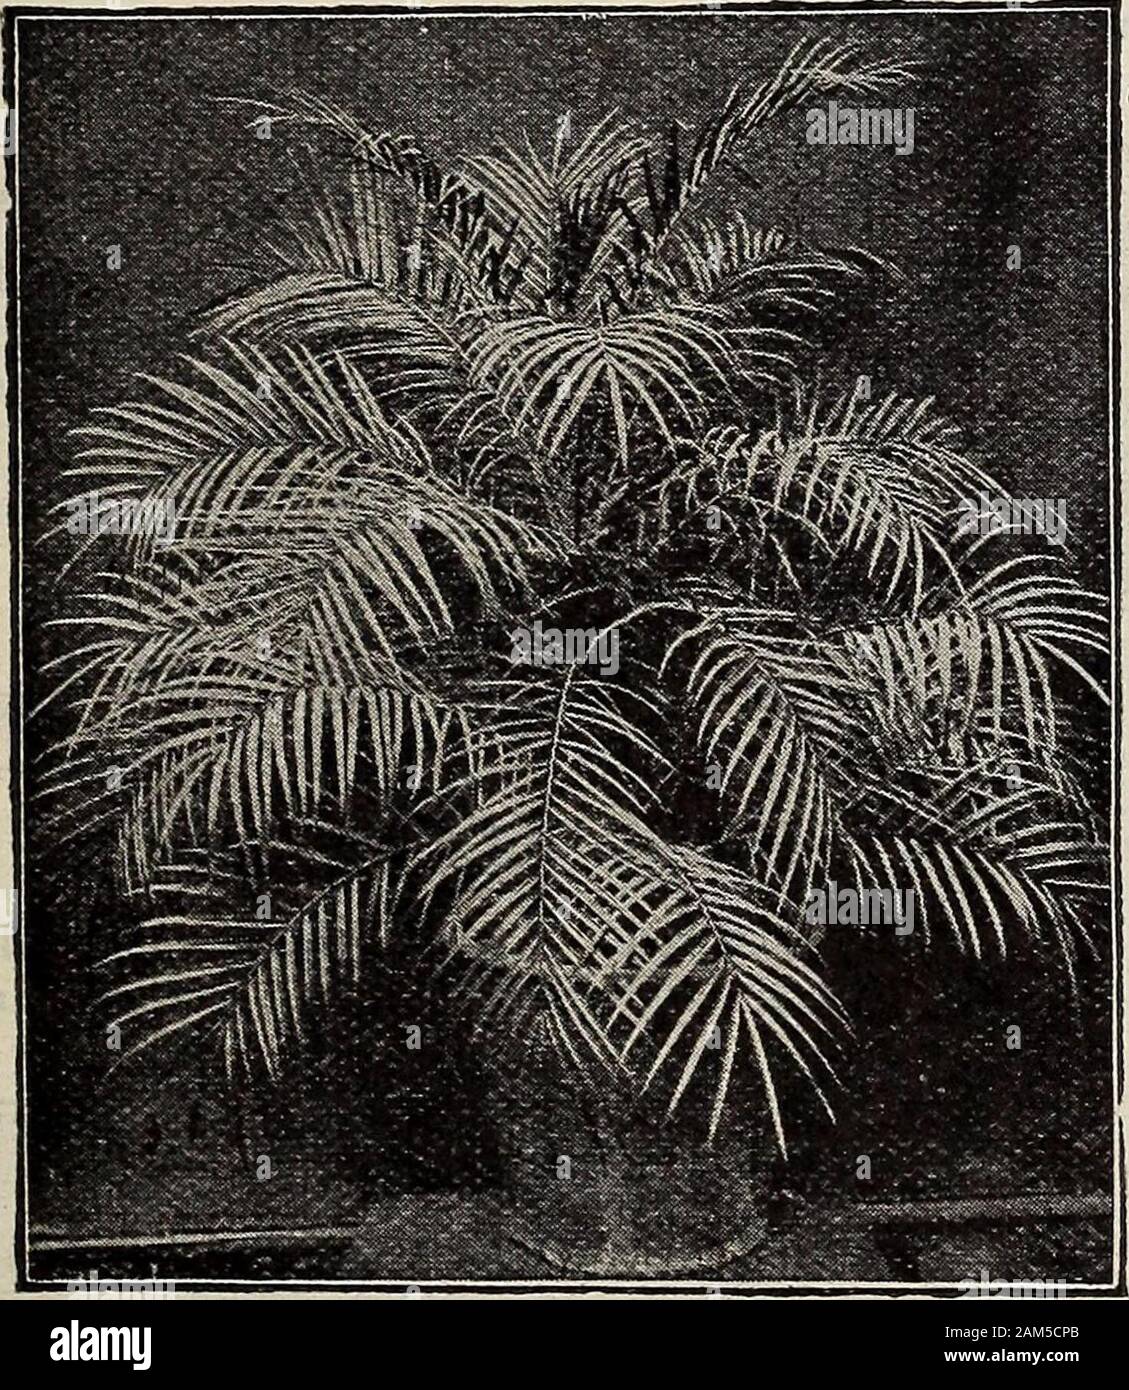 New floral guide : autumn 1913 . S The Kentia Palm. of the hardiest Oneand Kentia Belmoreana Palm. easiest to grow. It is of slow growth, but is not affectedby the dust and dry air of the house. Fine, thrifty plants,6 to 8 inches high, 25 cts. each; larger size, 35 cts., post-paid; extra size, 50 cts., by express. The Fail Palm (^aian^a Borbonica). Has attractive i. fan-shaped leaves of rich shining dark green, and beautifully fringed. Greatly in demand. Fine plants, 6 to 10 inches high, 25 cts. each; 10 to 15 inches, 35 cts. postpaid; 15 to 18 inches, 50 cts., by express. Phoenix Roebelini Pa Stock Photo